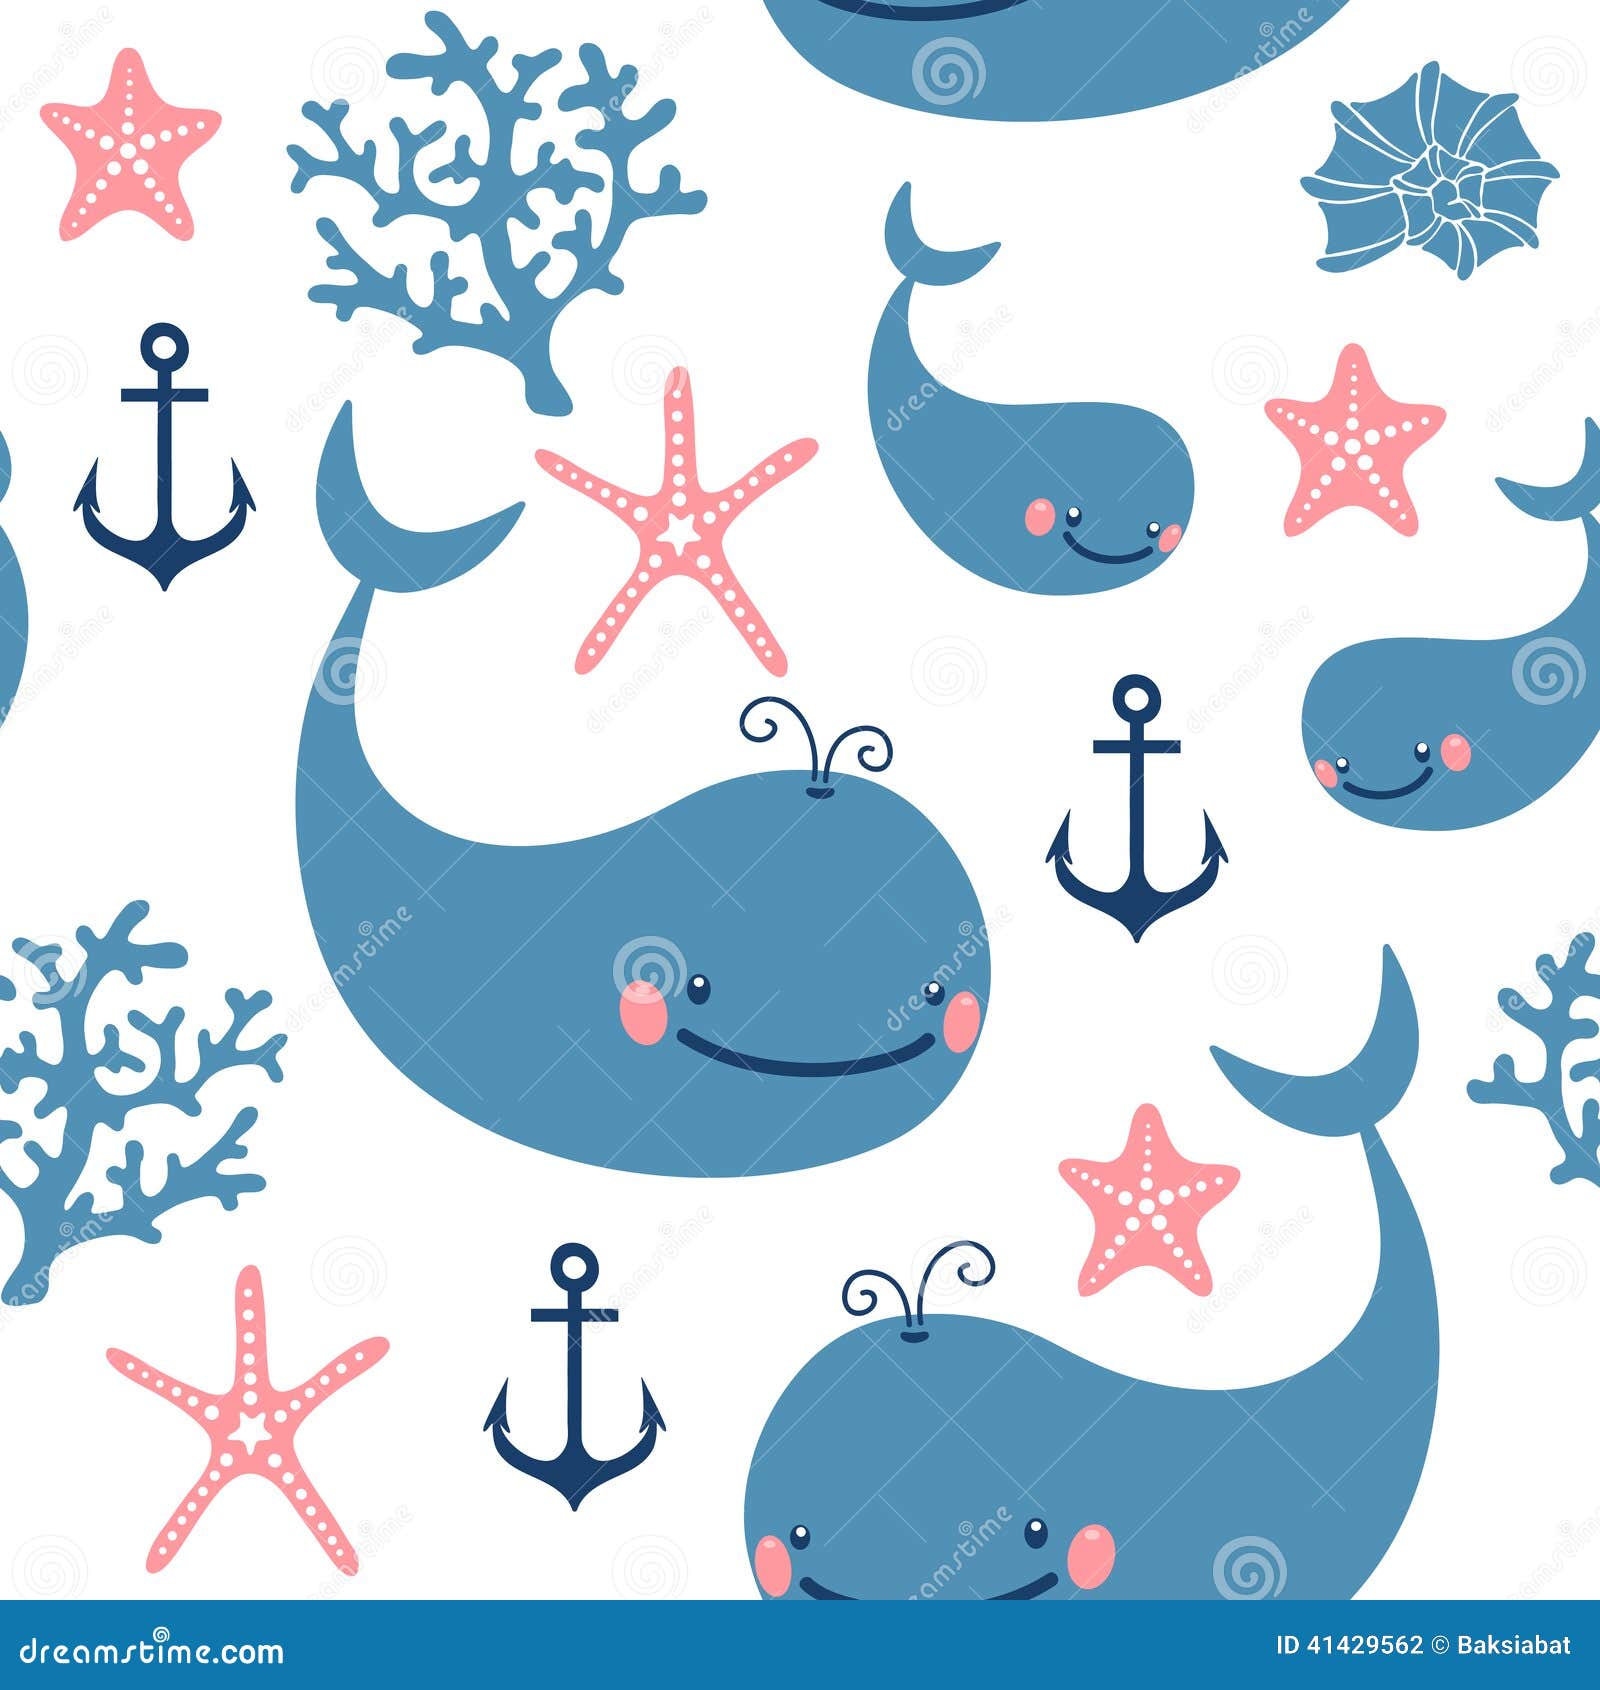 anchor wallpapers tumblr With Whales. Vector Cute Image Stock  Pattern Seamless